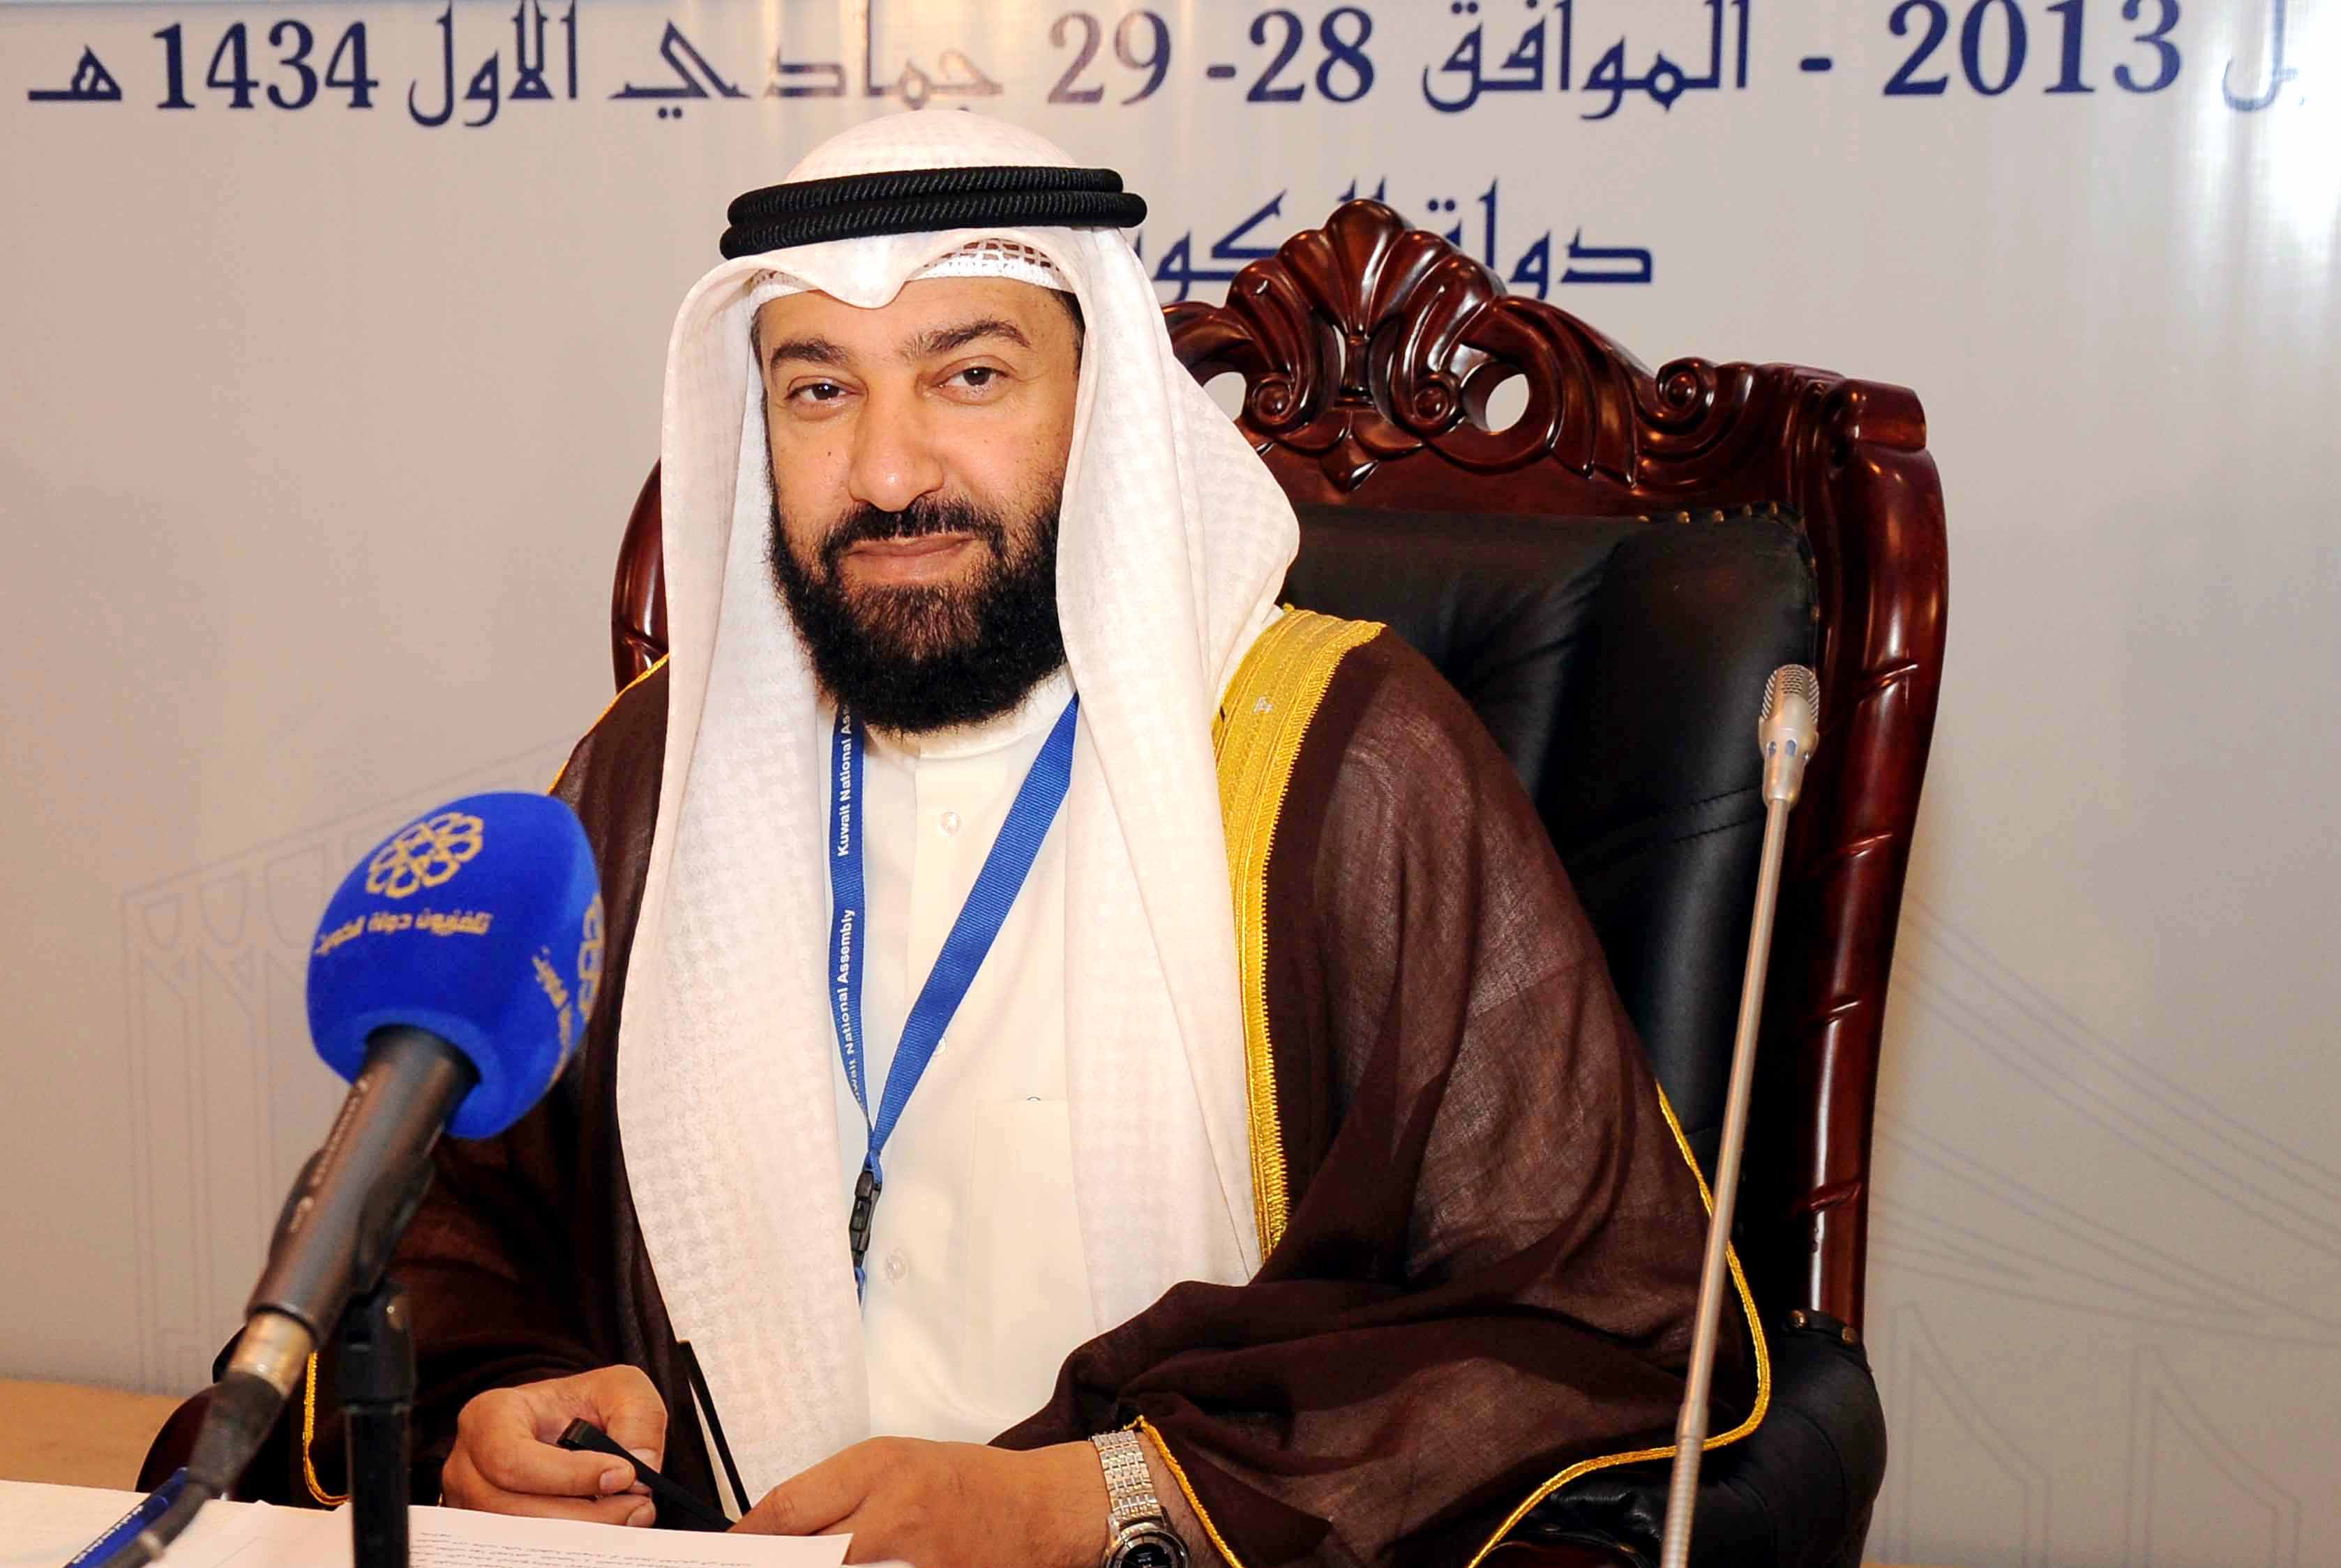 Head of the Political and Parliamentary Affairs Committee in the Arab Inter-Parliamentary Union MP Dr. Ali Al-Omair